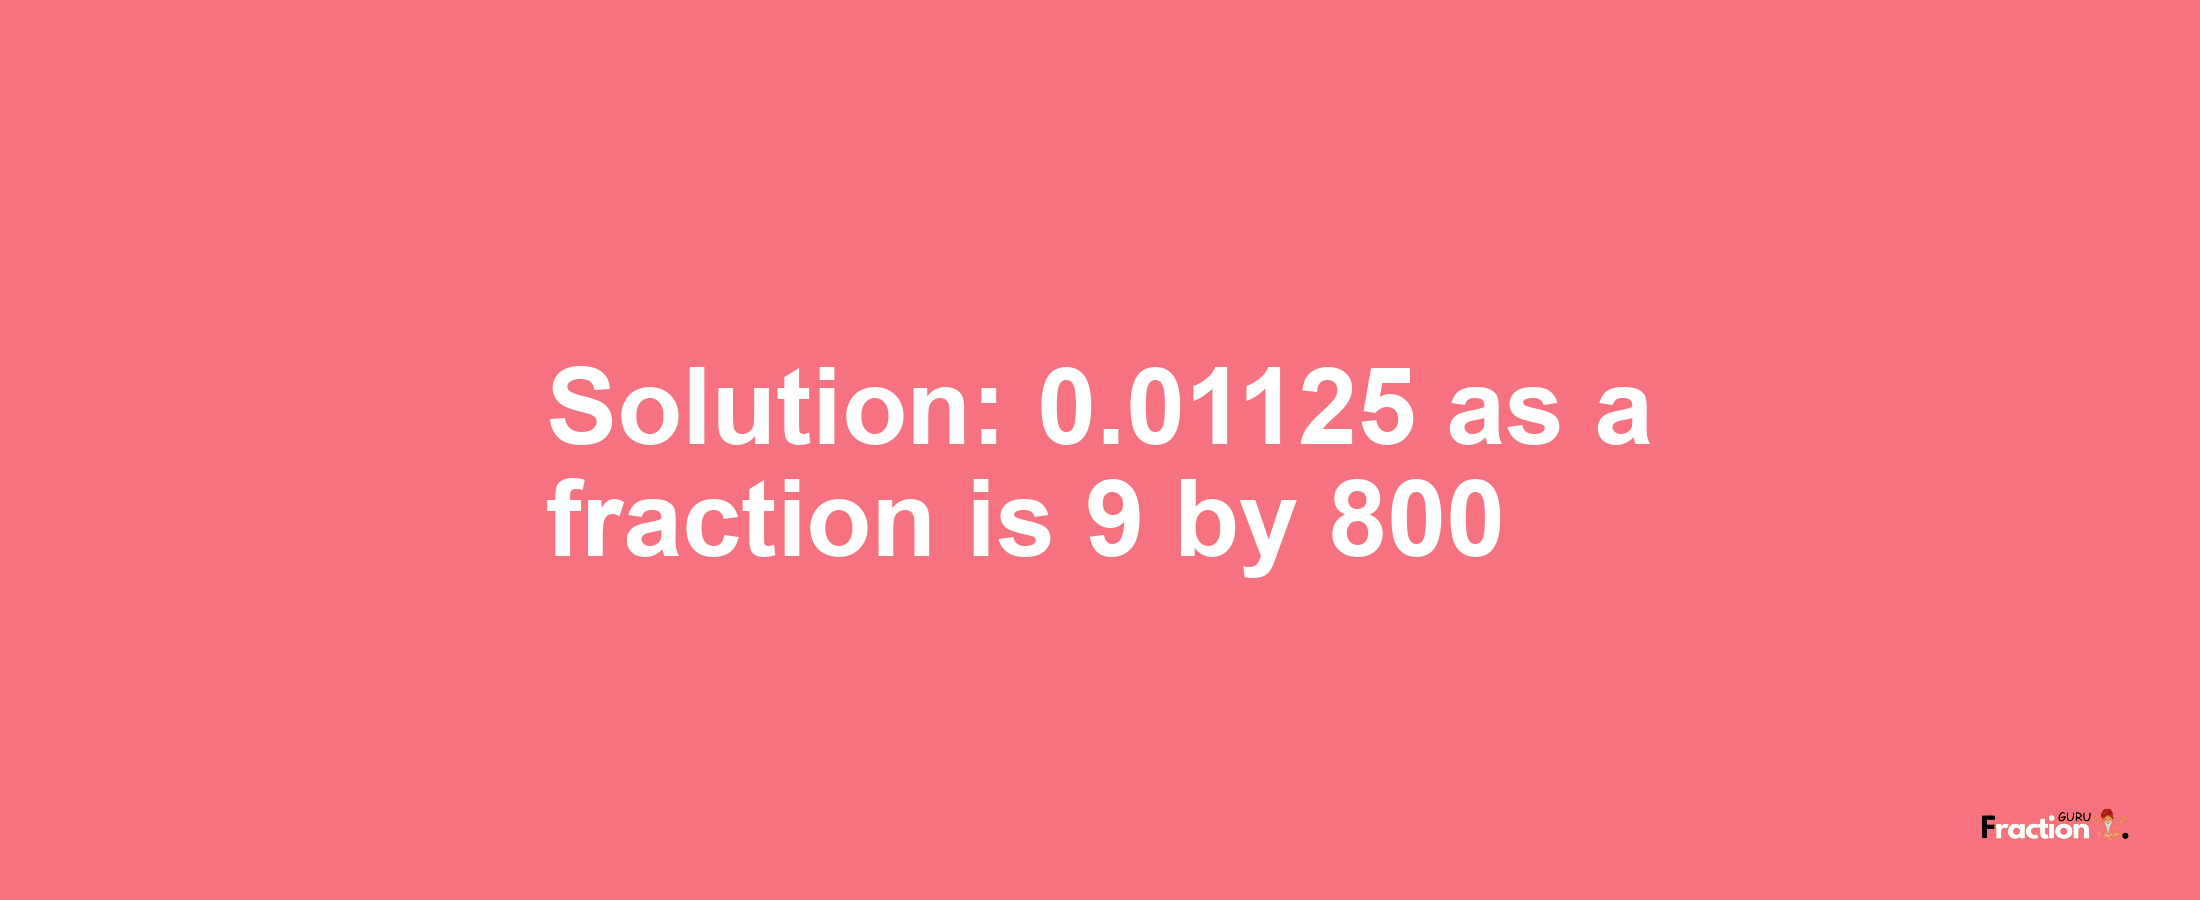 Solution:0.01125 as a fraction is 9/800